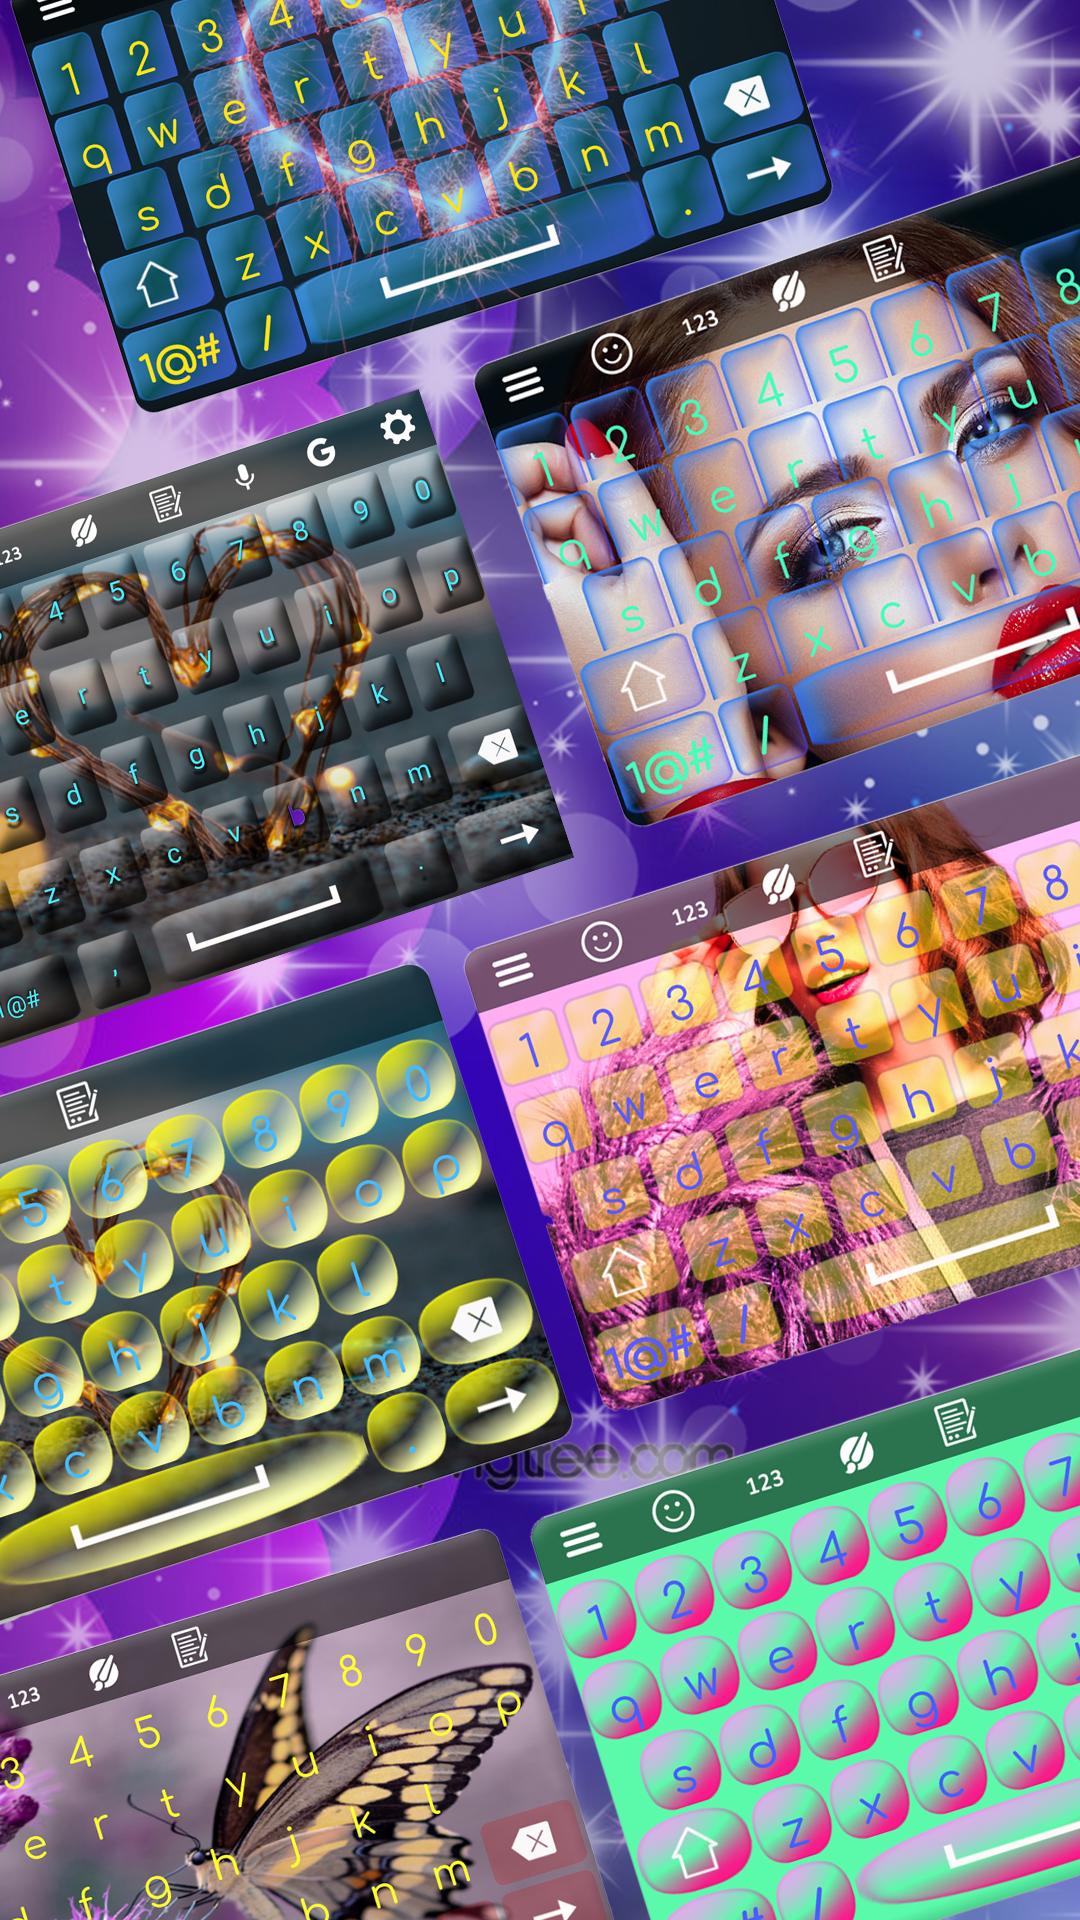 LED Keyboard Themes & Photo Keyboard Background APK pour Android Télécharger